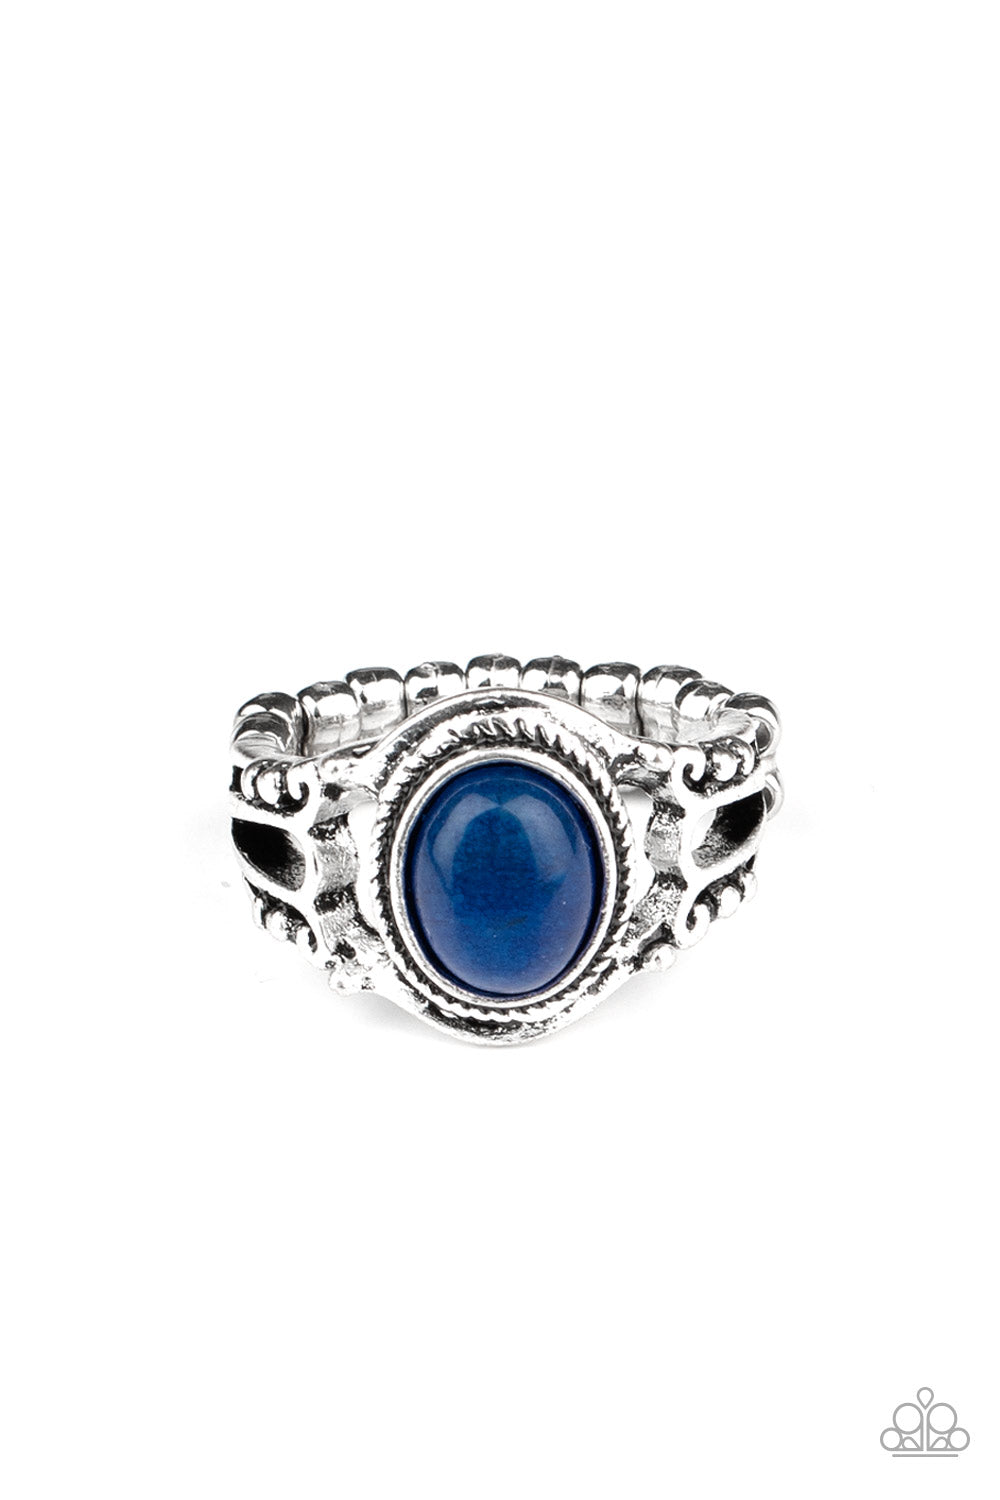 Ring - Peacefully Peaceful - Blue